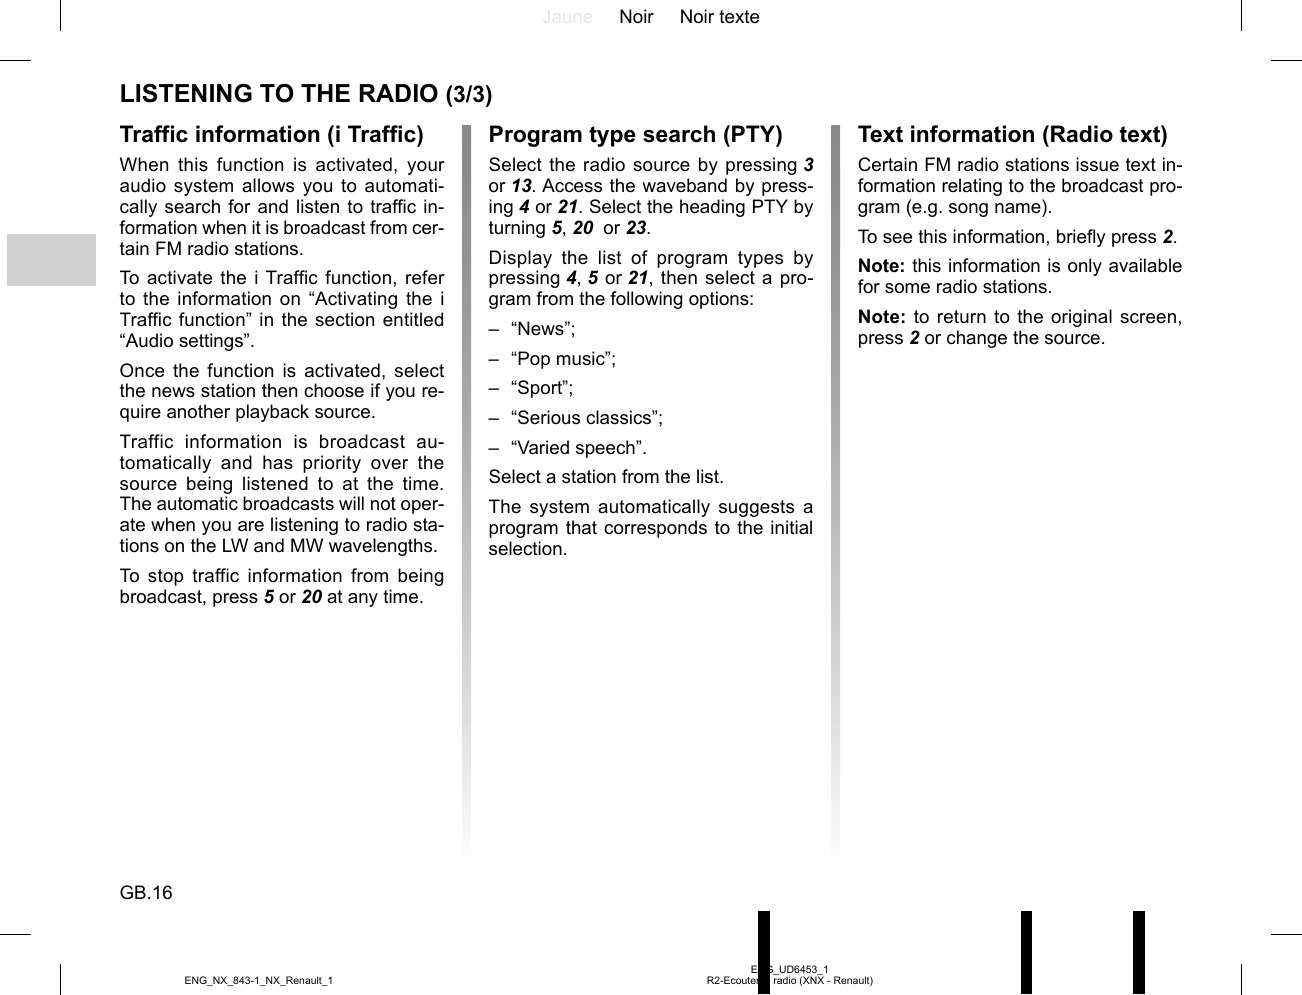 Jaune Noir Noir texteGB.16ENG_UD6453_1R2-Ecouter la radio (XNX - Renault)ENG_NX_843-1_NX_Renault_1LISTENING TO THE RADIO (3/3)Text information (Radio text)Certain FM radio stations issue text in-formation relating to the broadcast pro-gram (e.g. song name).To see this information, briefly press 2.Note: this information is only available for some radio stations.Note: to return to the original screen, press 2 or change the source.Traffic information (i Traffic)When this function is activated, your audio system allows you to automati-cally search for and listen to traffic in-formation when it is broadcast from cer-tain FM radio stations.To activate the i Traffic function, refer to the information on “Activating the i Traffic function” in the section entitled “Audio settings”.Once the function is activated, select the news station then choose if you re-quire another playback source.Traffic information is broadcast au-tomatically and has priority over the source being listened to at the time. The automatic broadcasts will not oper-ate when you are listening to radio sta-tions on the LW and MW wavelengths.To stop traffic information from being broadcast, press 5 or 20 at any time.Program type search (PTY)Select the radio source by pressing 3 or 13. Access the waveband by press-ing 4 or 21. Select the heading PTY by turning 5, 20  or 23.Display the list of program types by pressing 4, 5 or 21, then select a pro-gram from the following options:– “News”;– “Pop music”;– “Sport”;– “Serious classics”;– “Varied speech”.Select a station from the list.The system automatically suggests a program that corresponds to the initial selection.